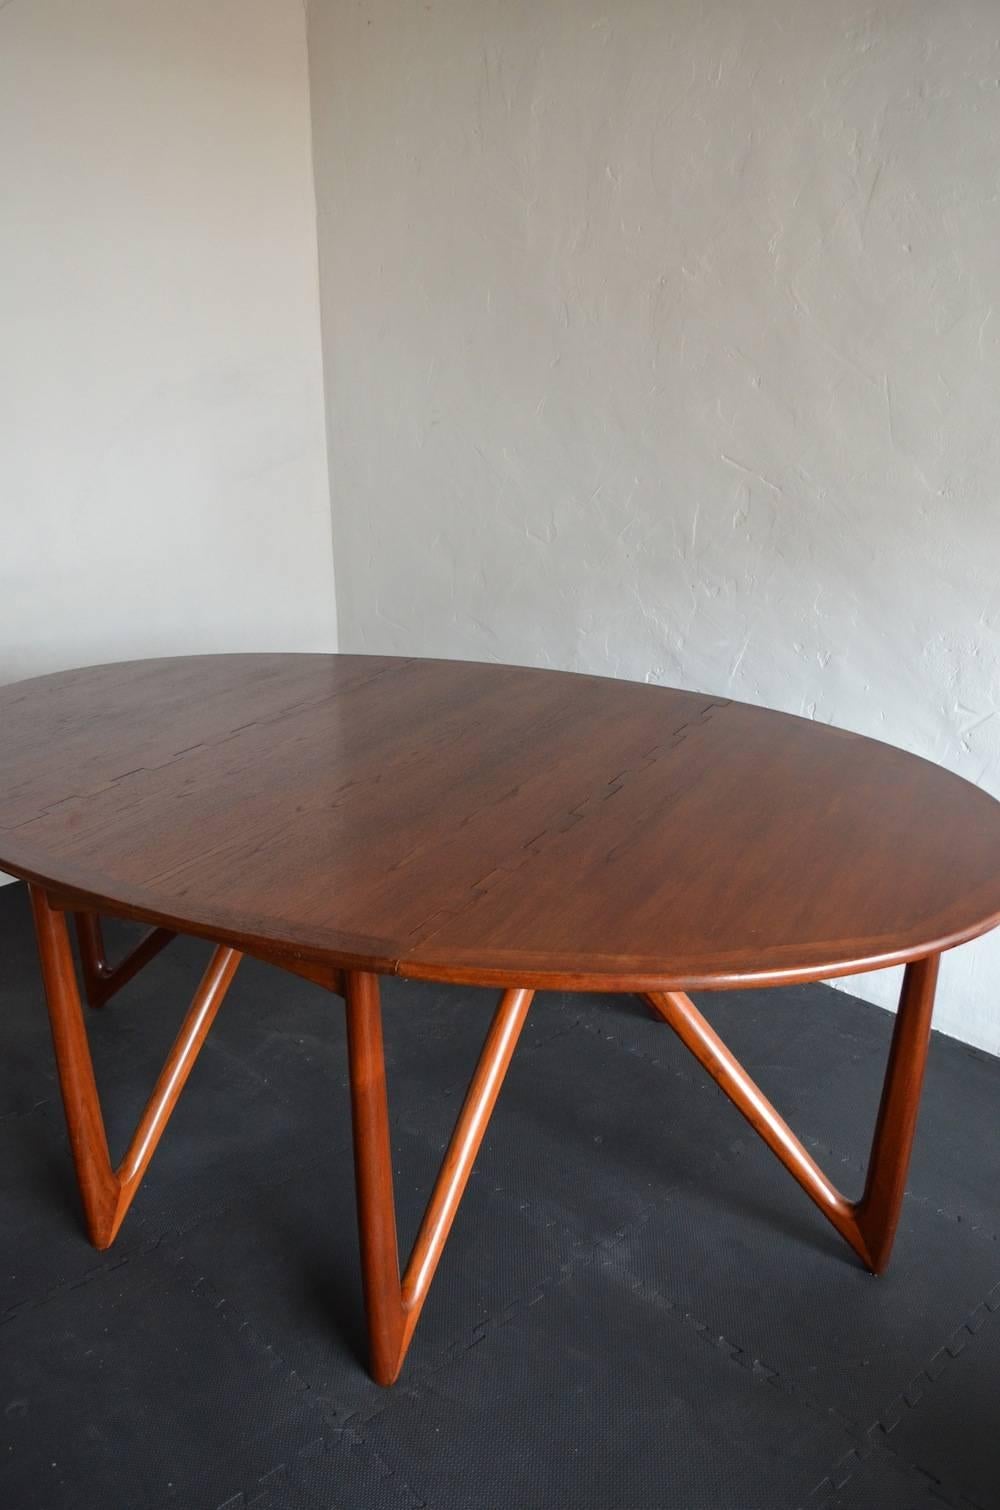 A stunning dark teak, oval table designed by Danish architect Kurt Østervig and manufactured by Jason Møbler in the 1960s. 

This table displays exceptional craftsmanship with beautiful trapezoid sculpted legs and hinged interlocking double drop